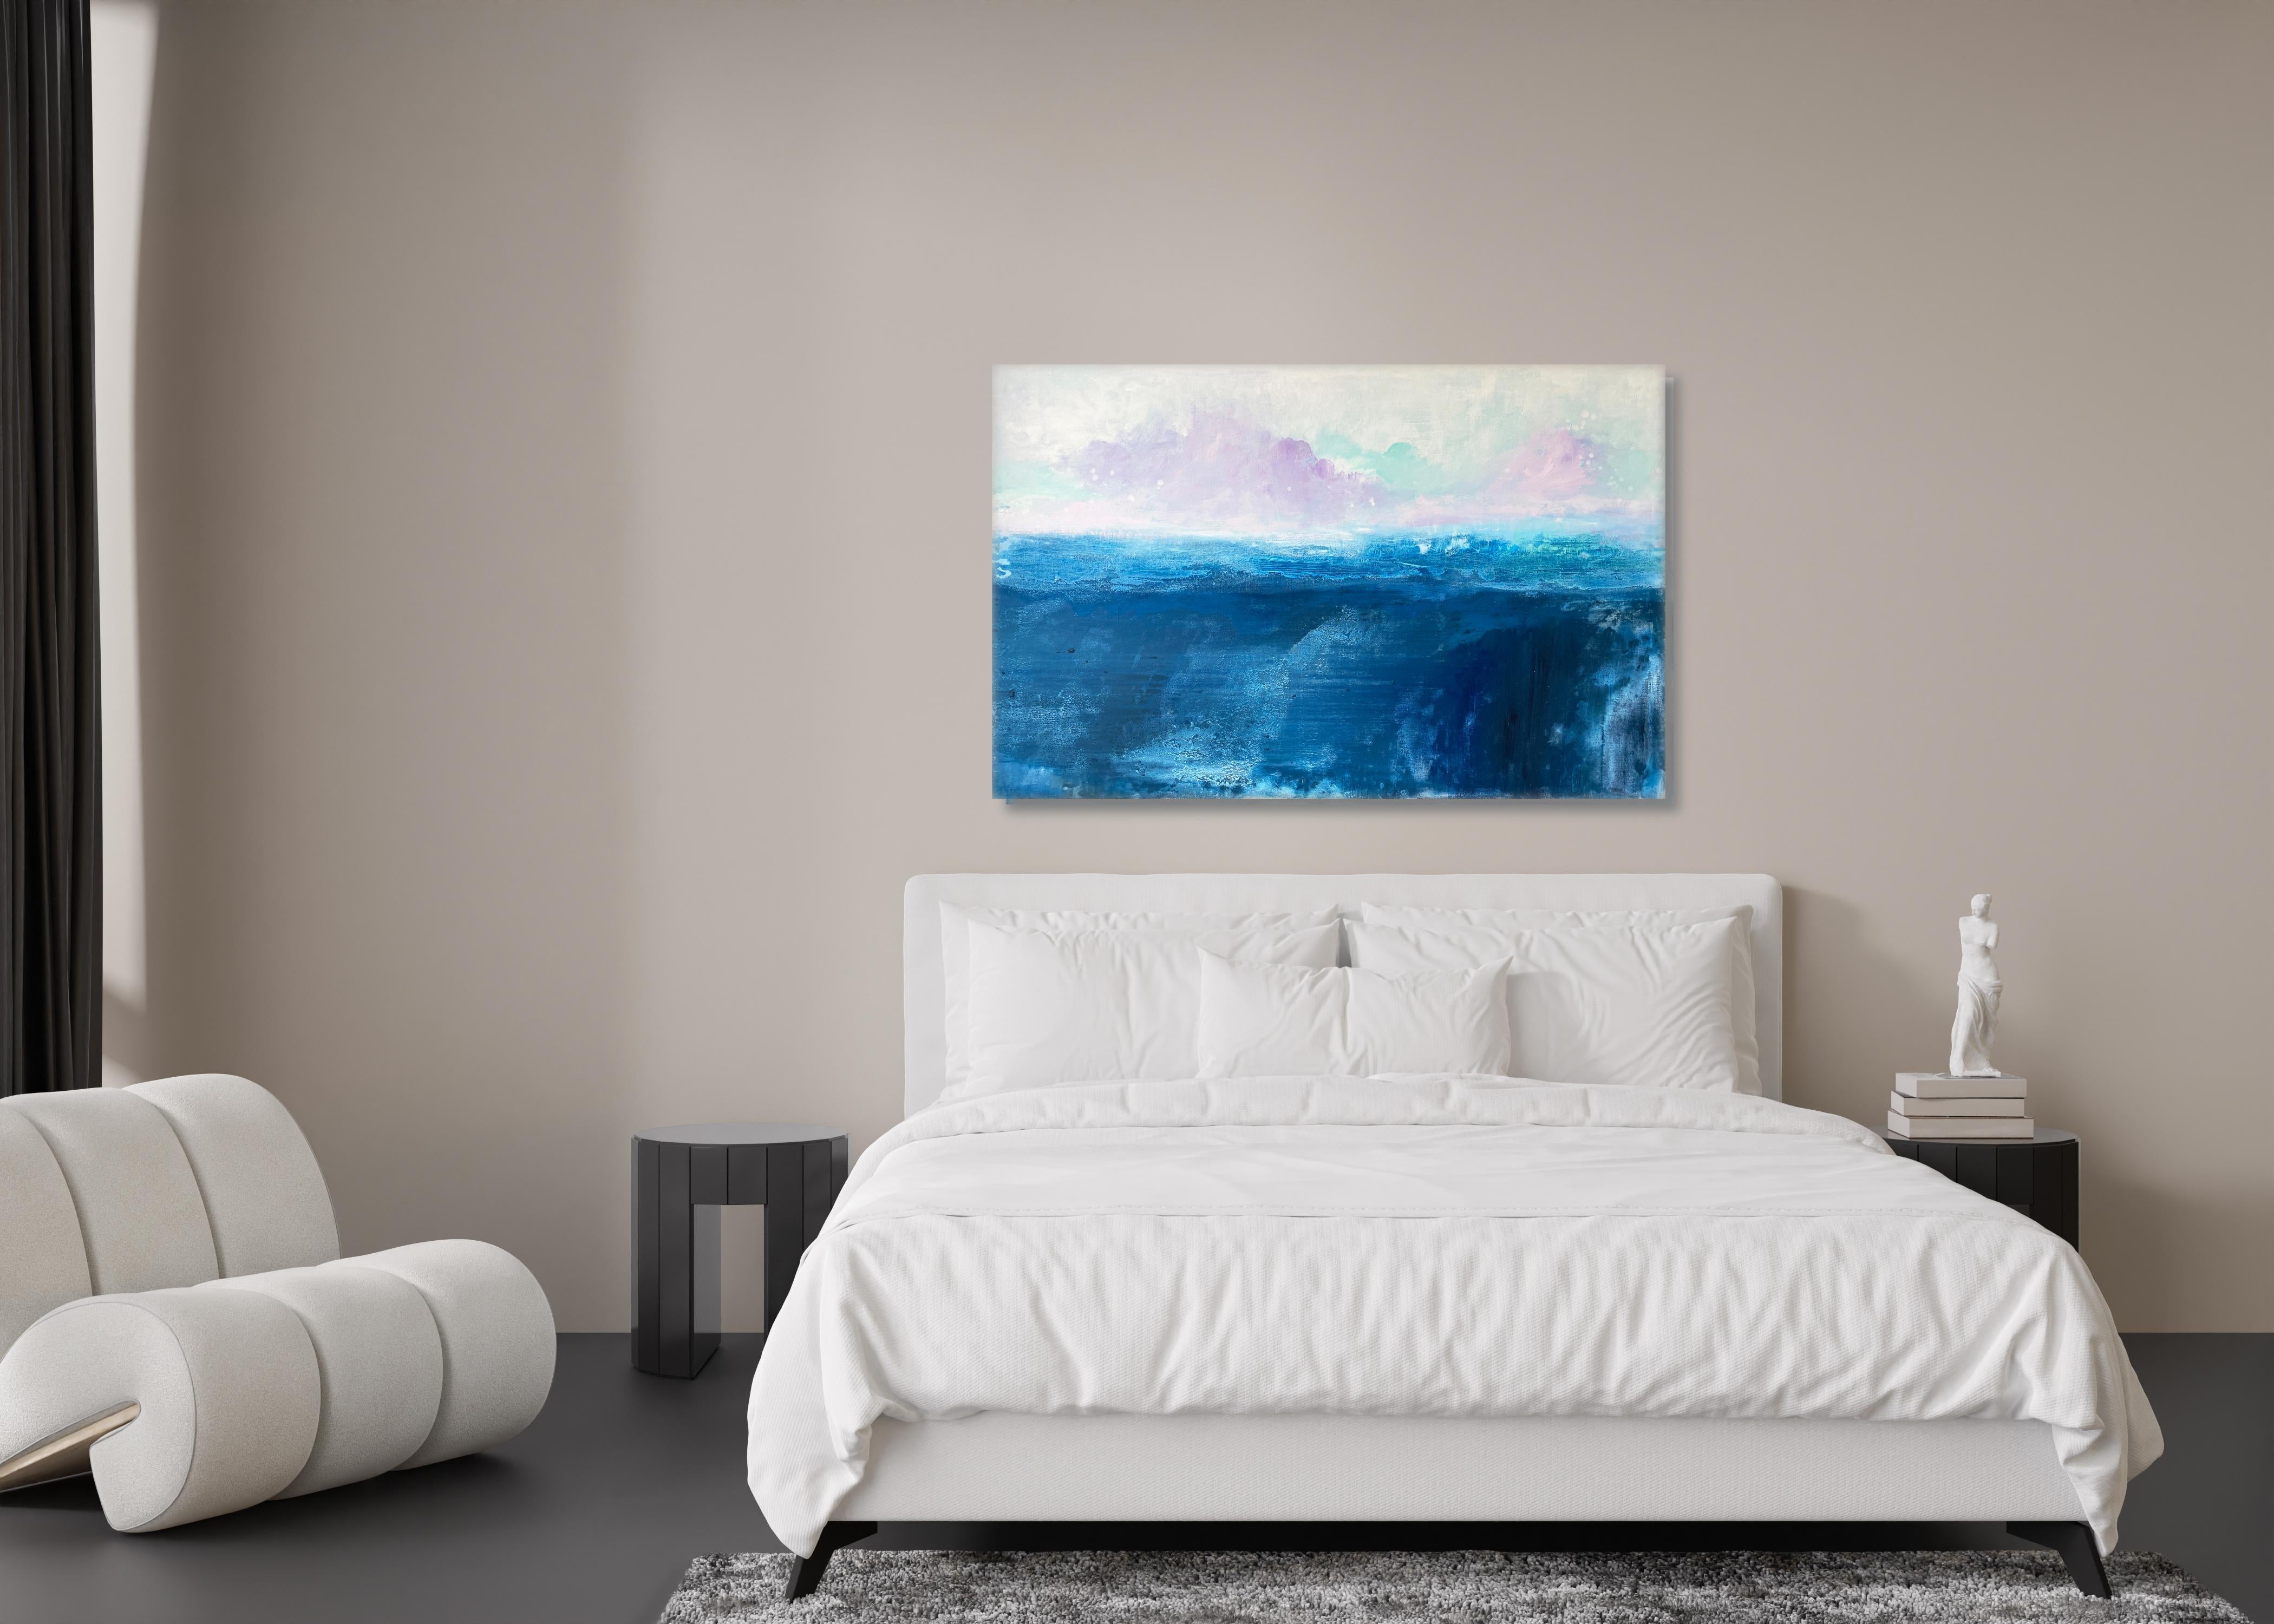 New Day Beginning blue ocean abstract landscape cloudy impressionism sky  - Painting by Kathleen Rhee